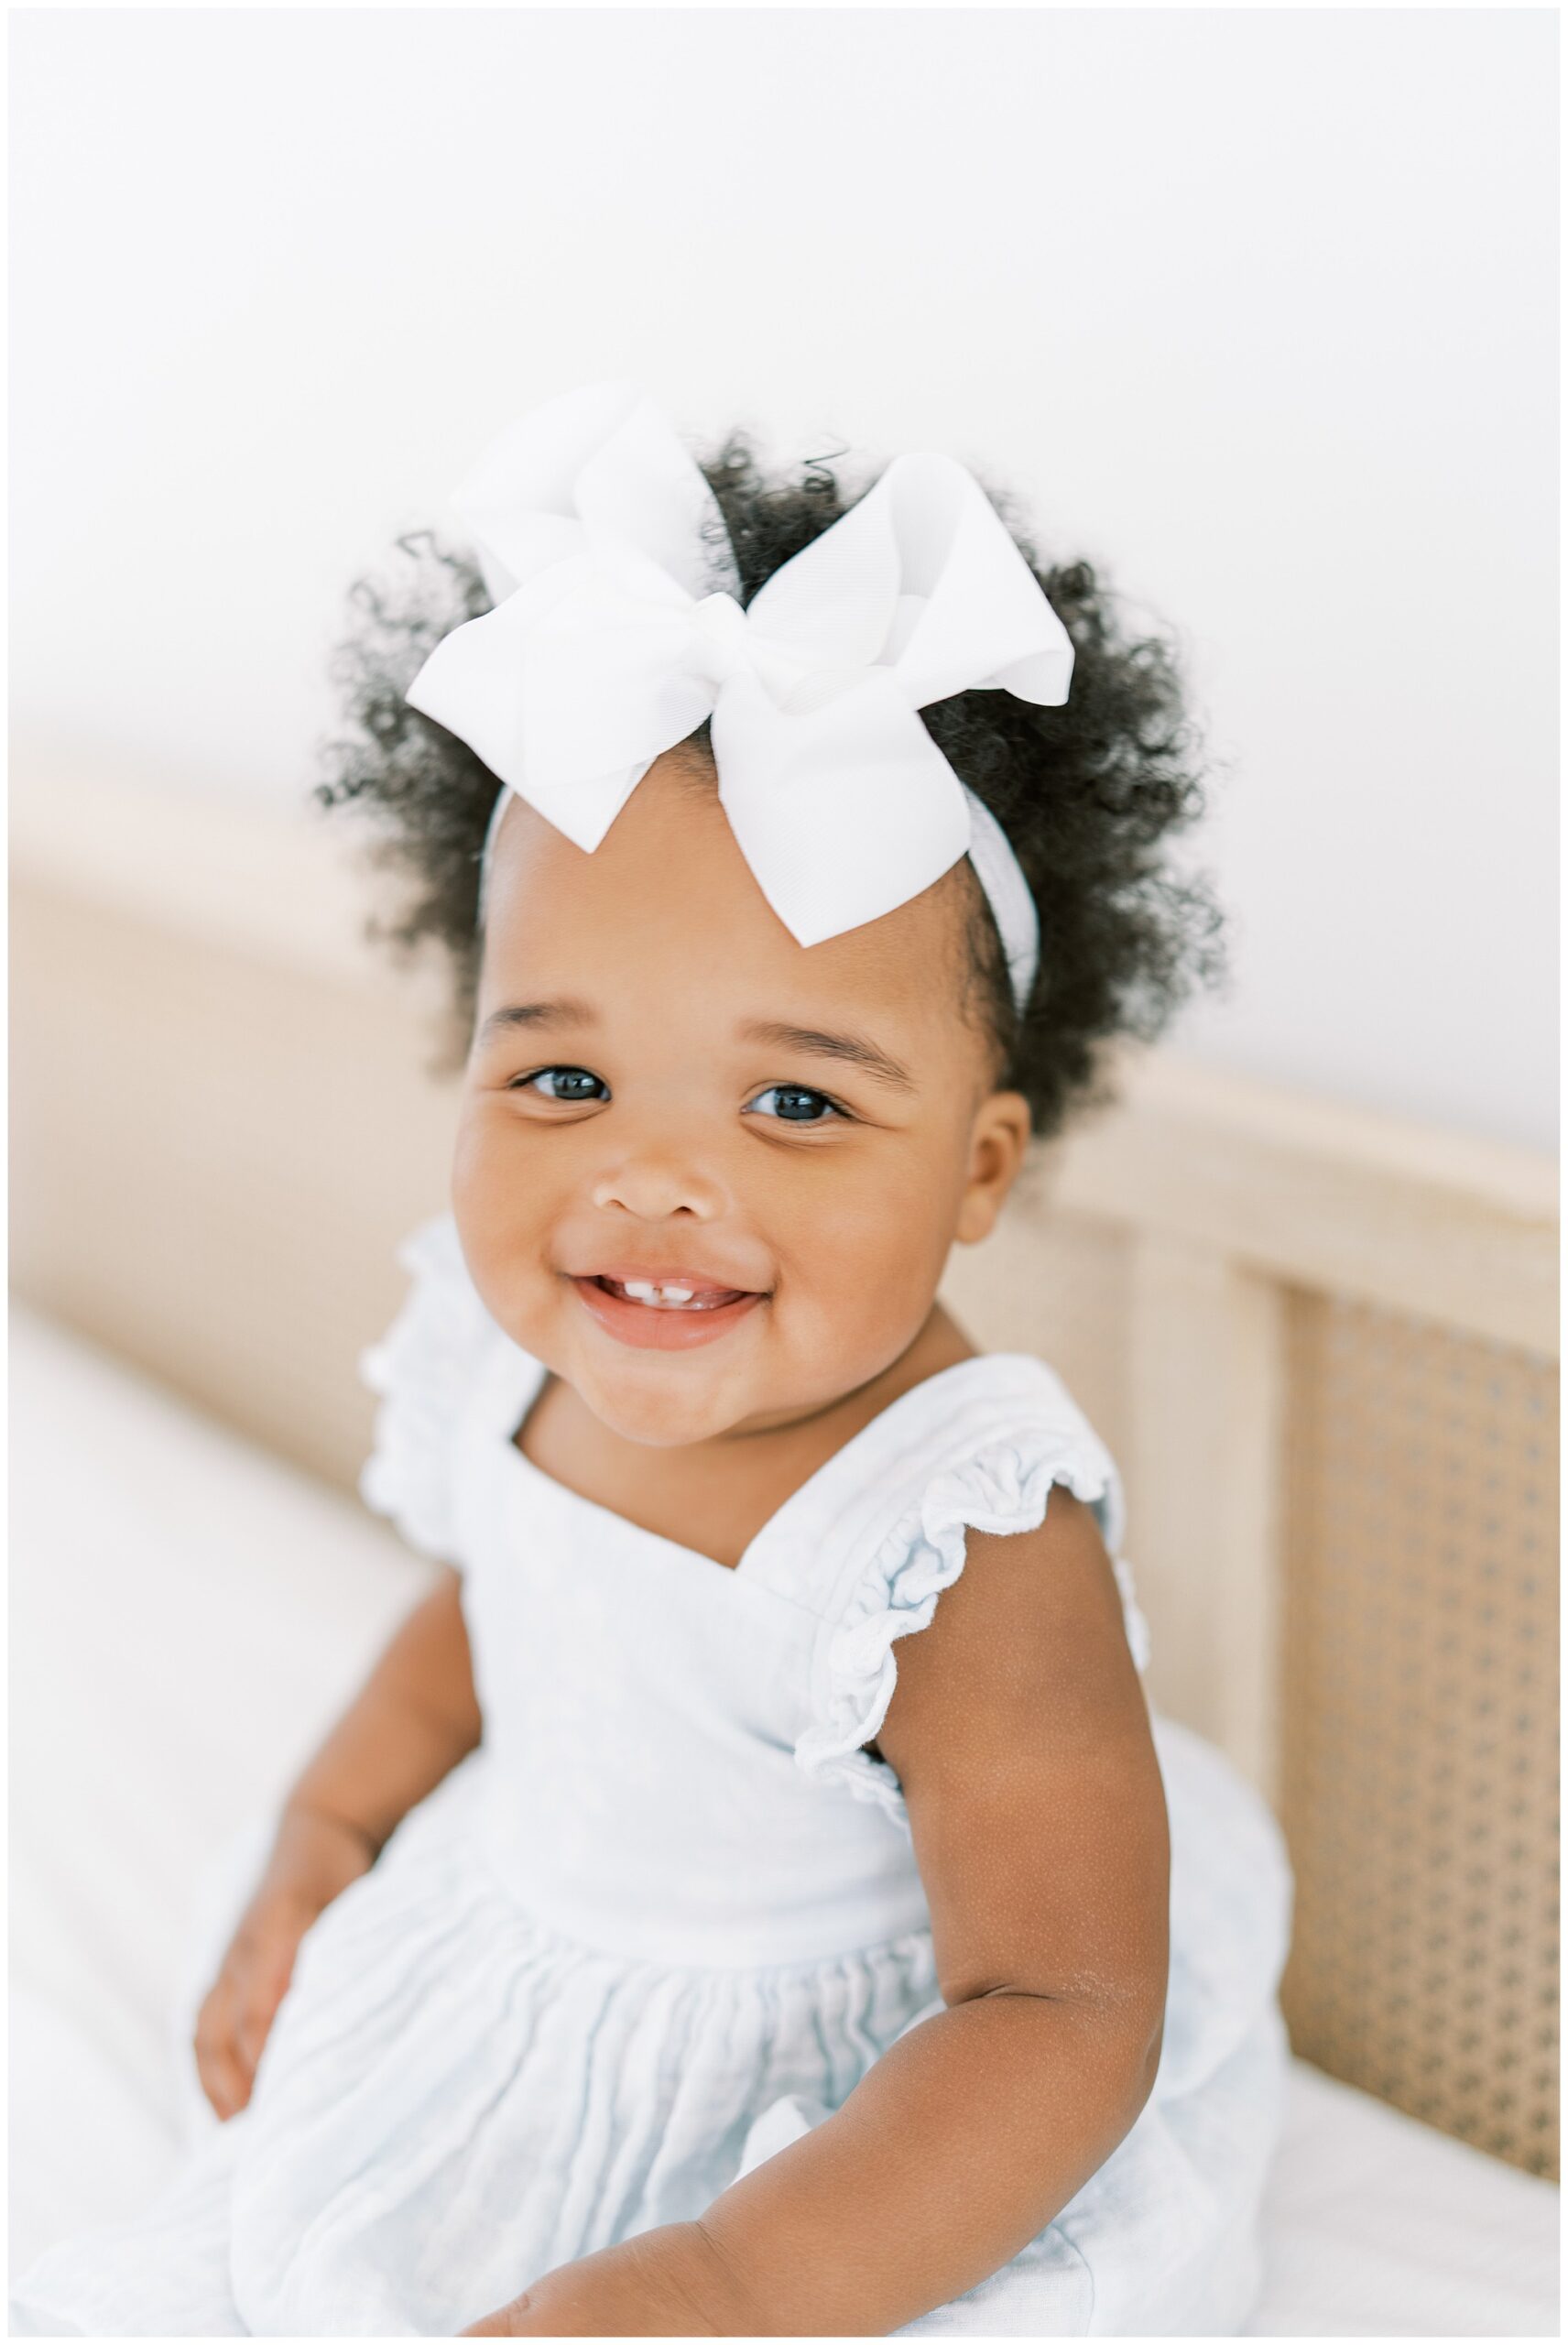 Portrait of a one year old girl in a white dress with a large white bow on her headband.